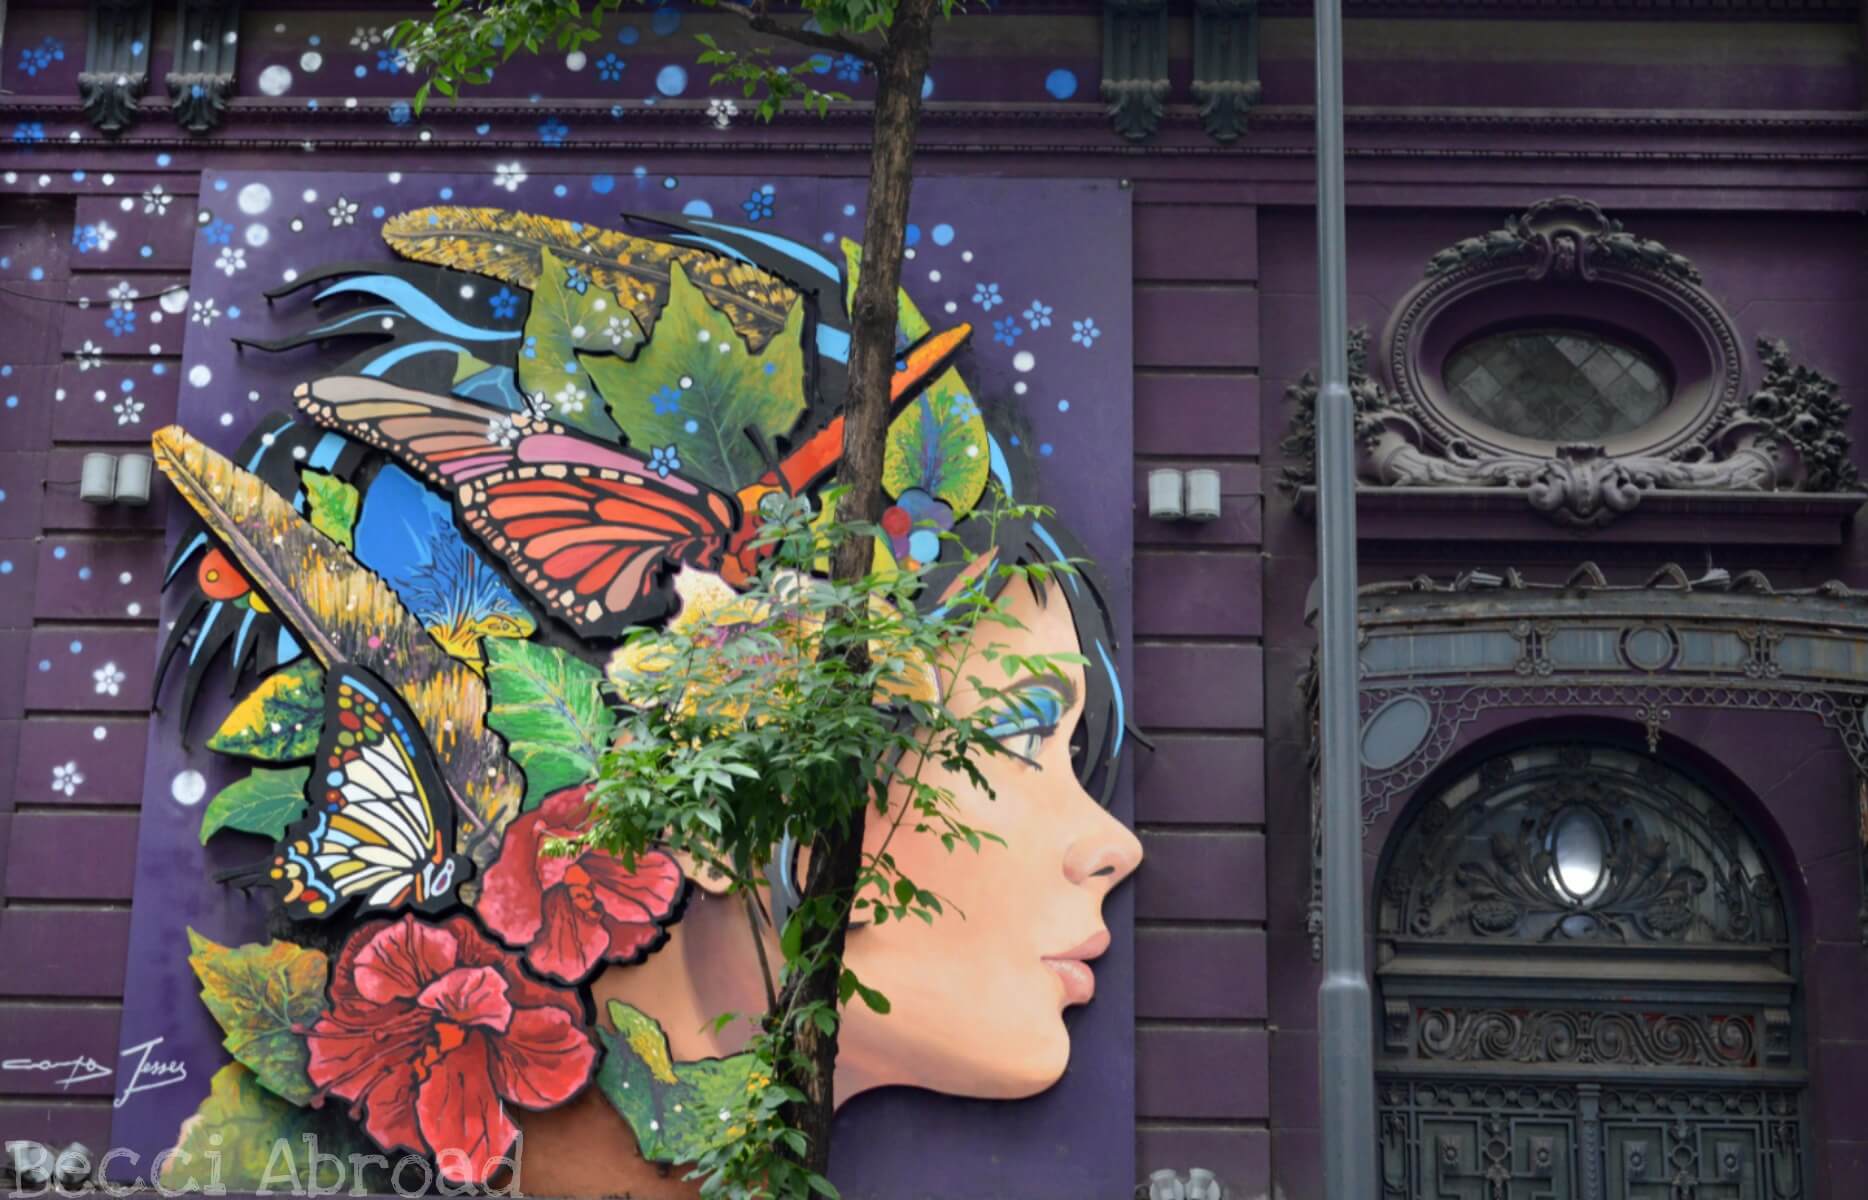 Street art that you can't miss when in Buenos Aires